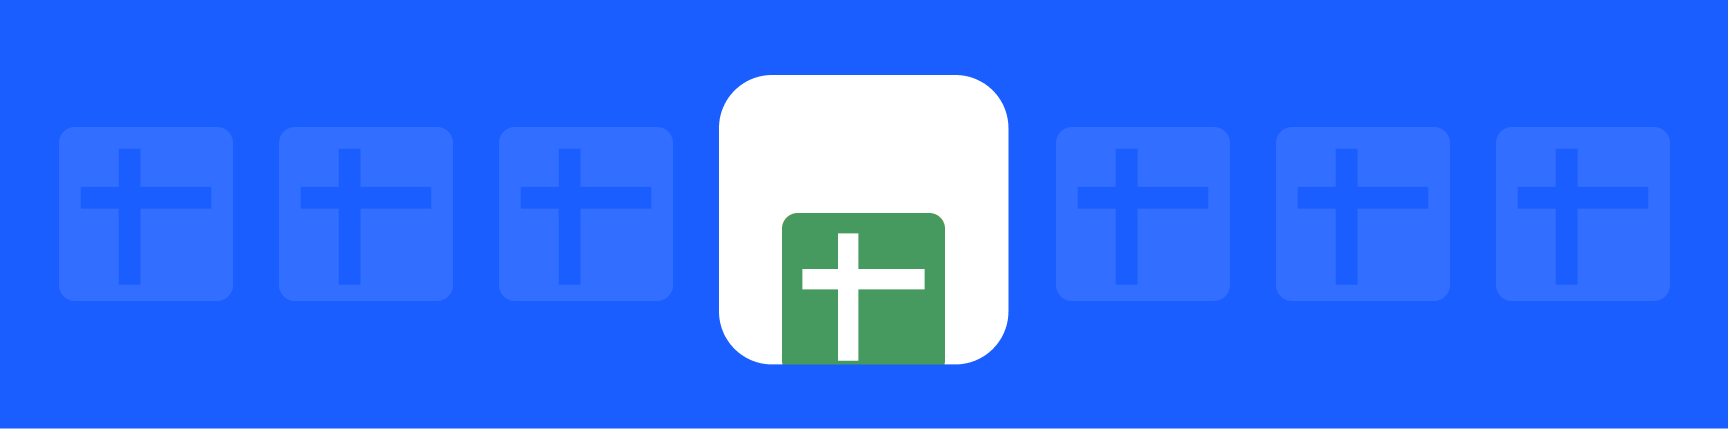 A white block with the Google Sheets logo in the foreground, with a blue background